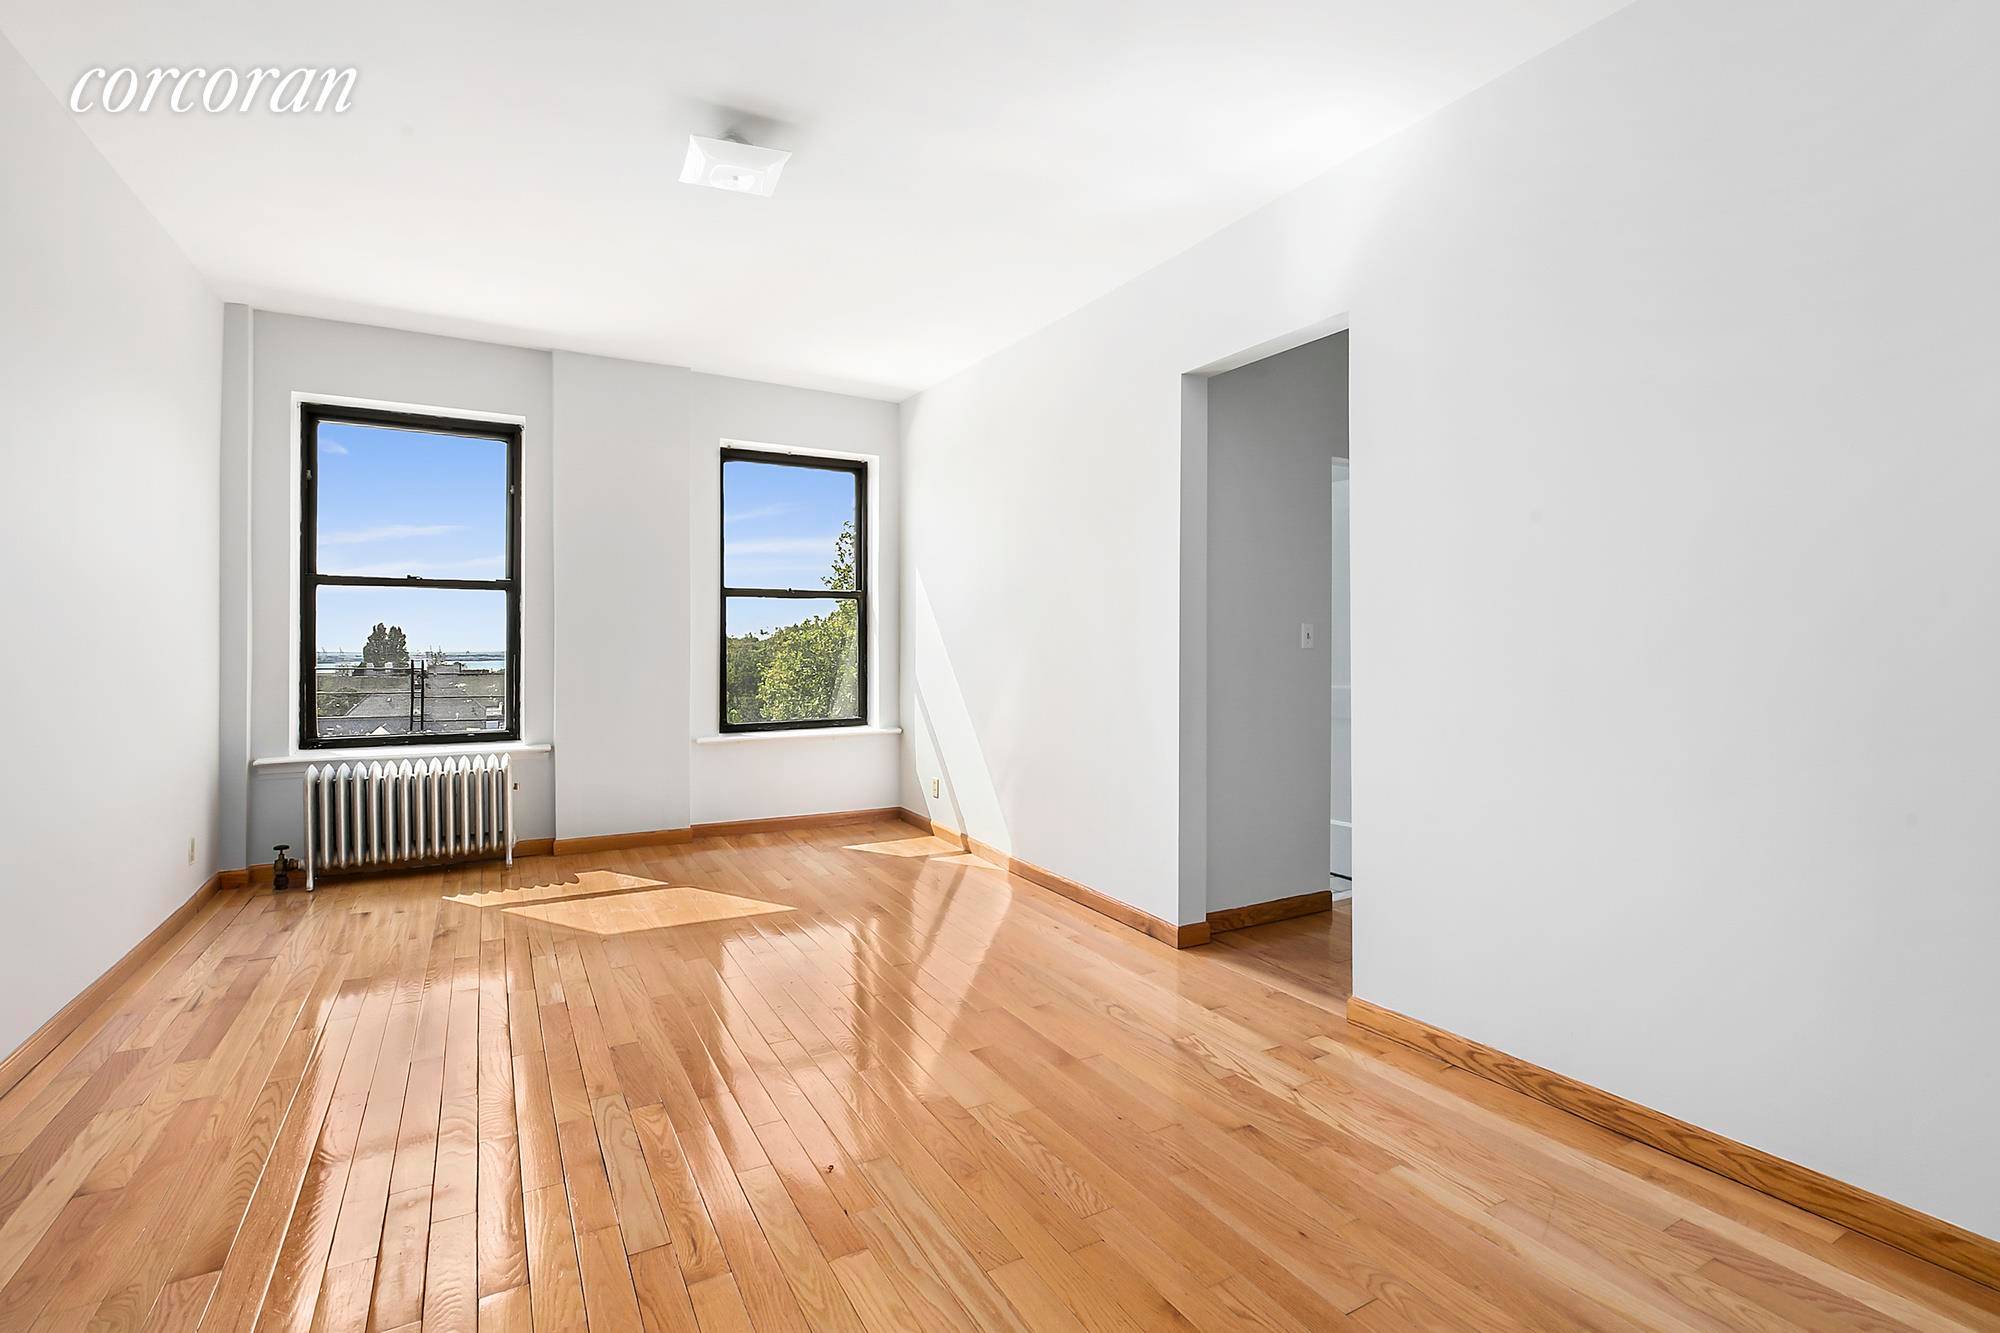 Welcome to this spacious true two bedroom, 1 bath, 4th floor walk up corner unit located in Prime Bay Ridge.